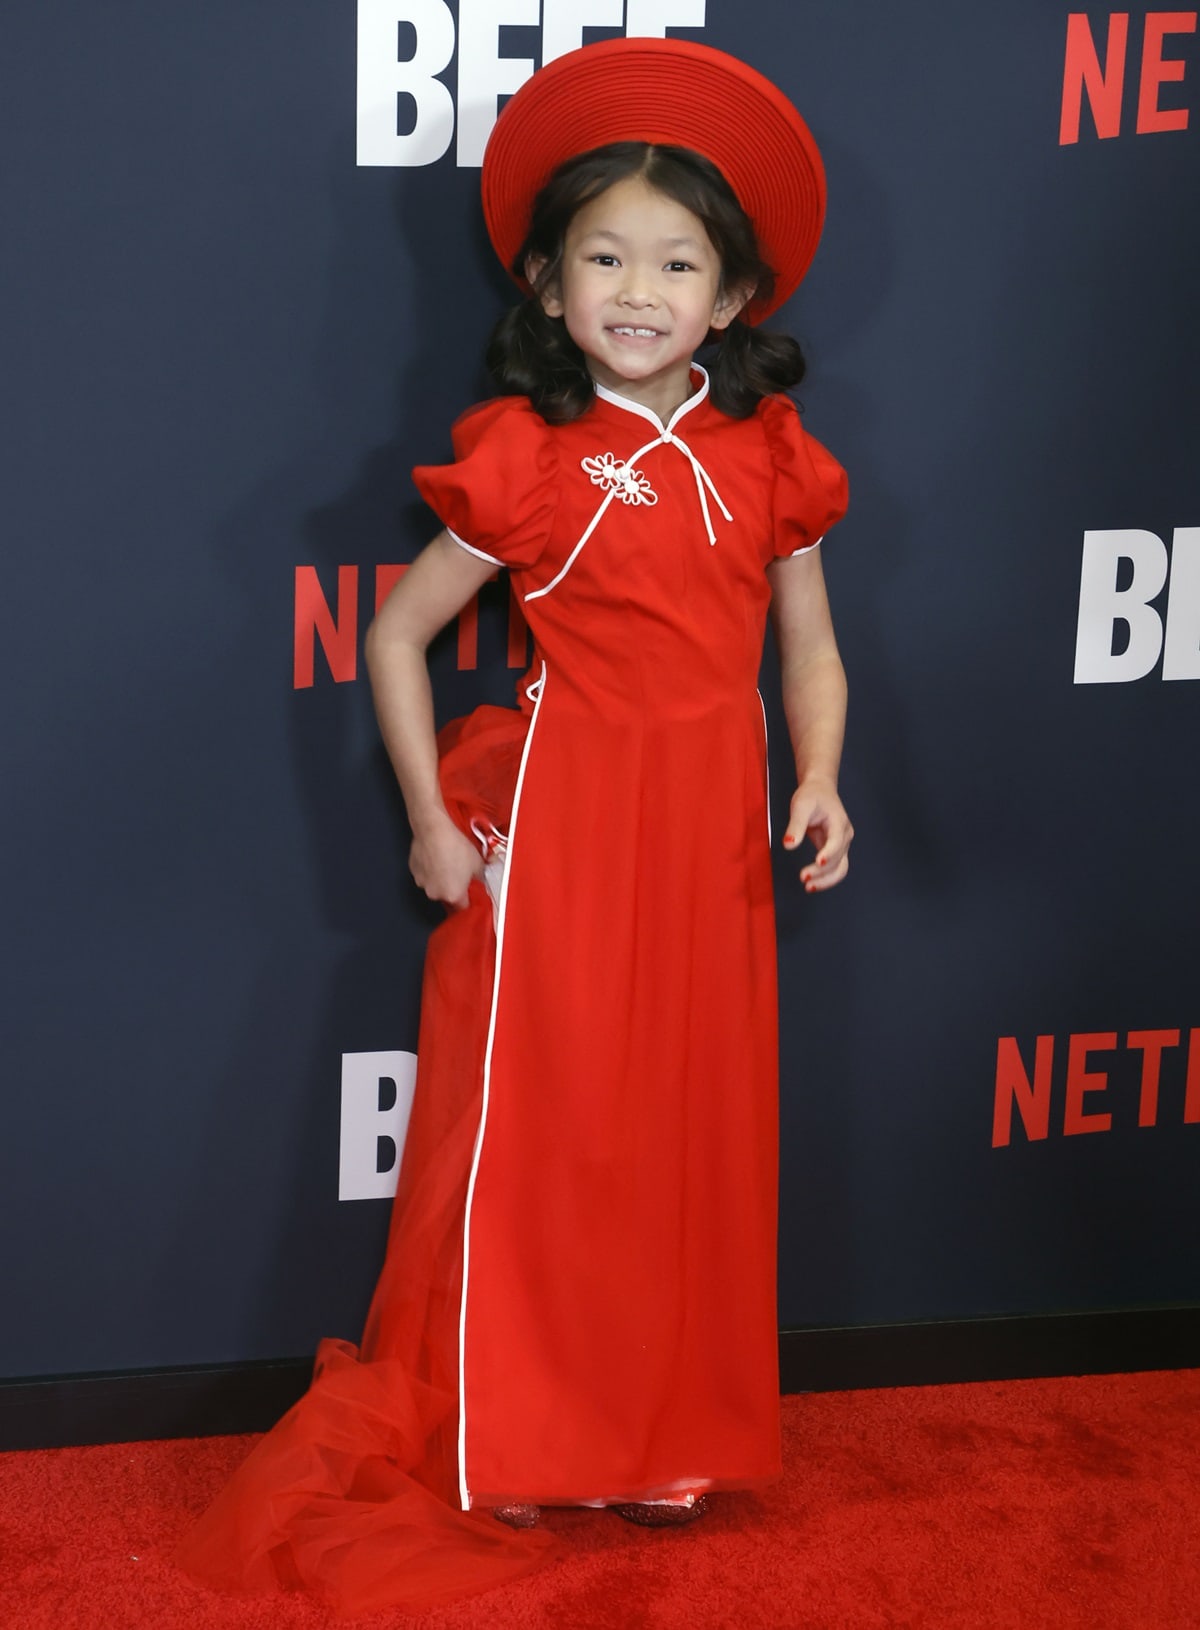 Remy Holt, who is of Chinese, Vietnamese, and English heritage, started modeling at age 3 and played Madelyn Davis in the American Western drama television series 1923